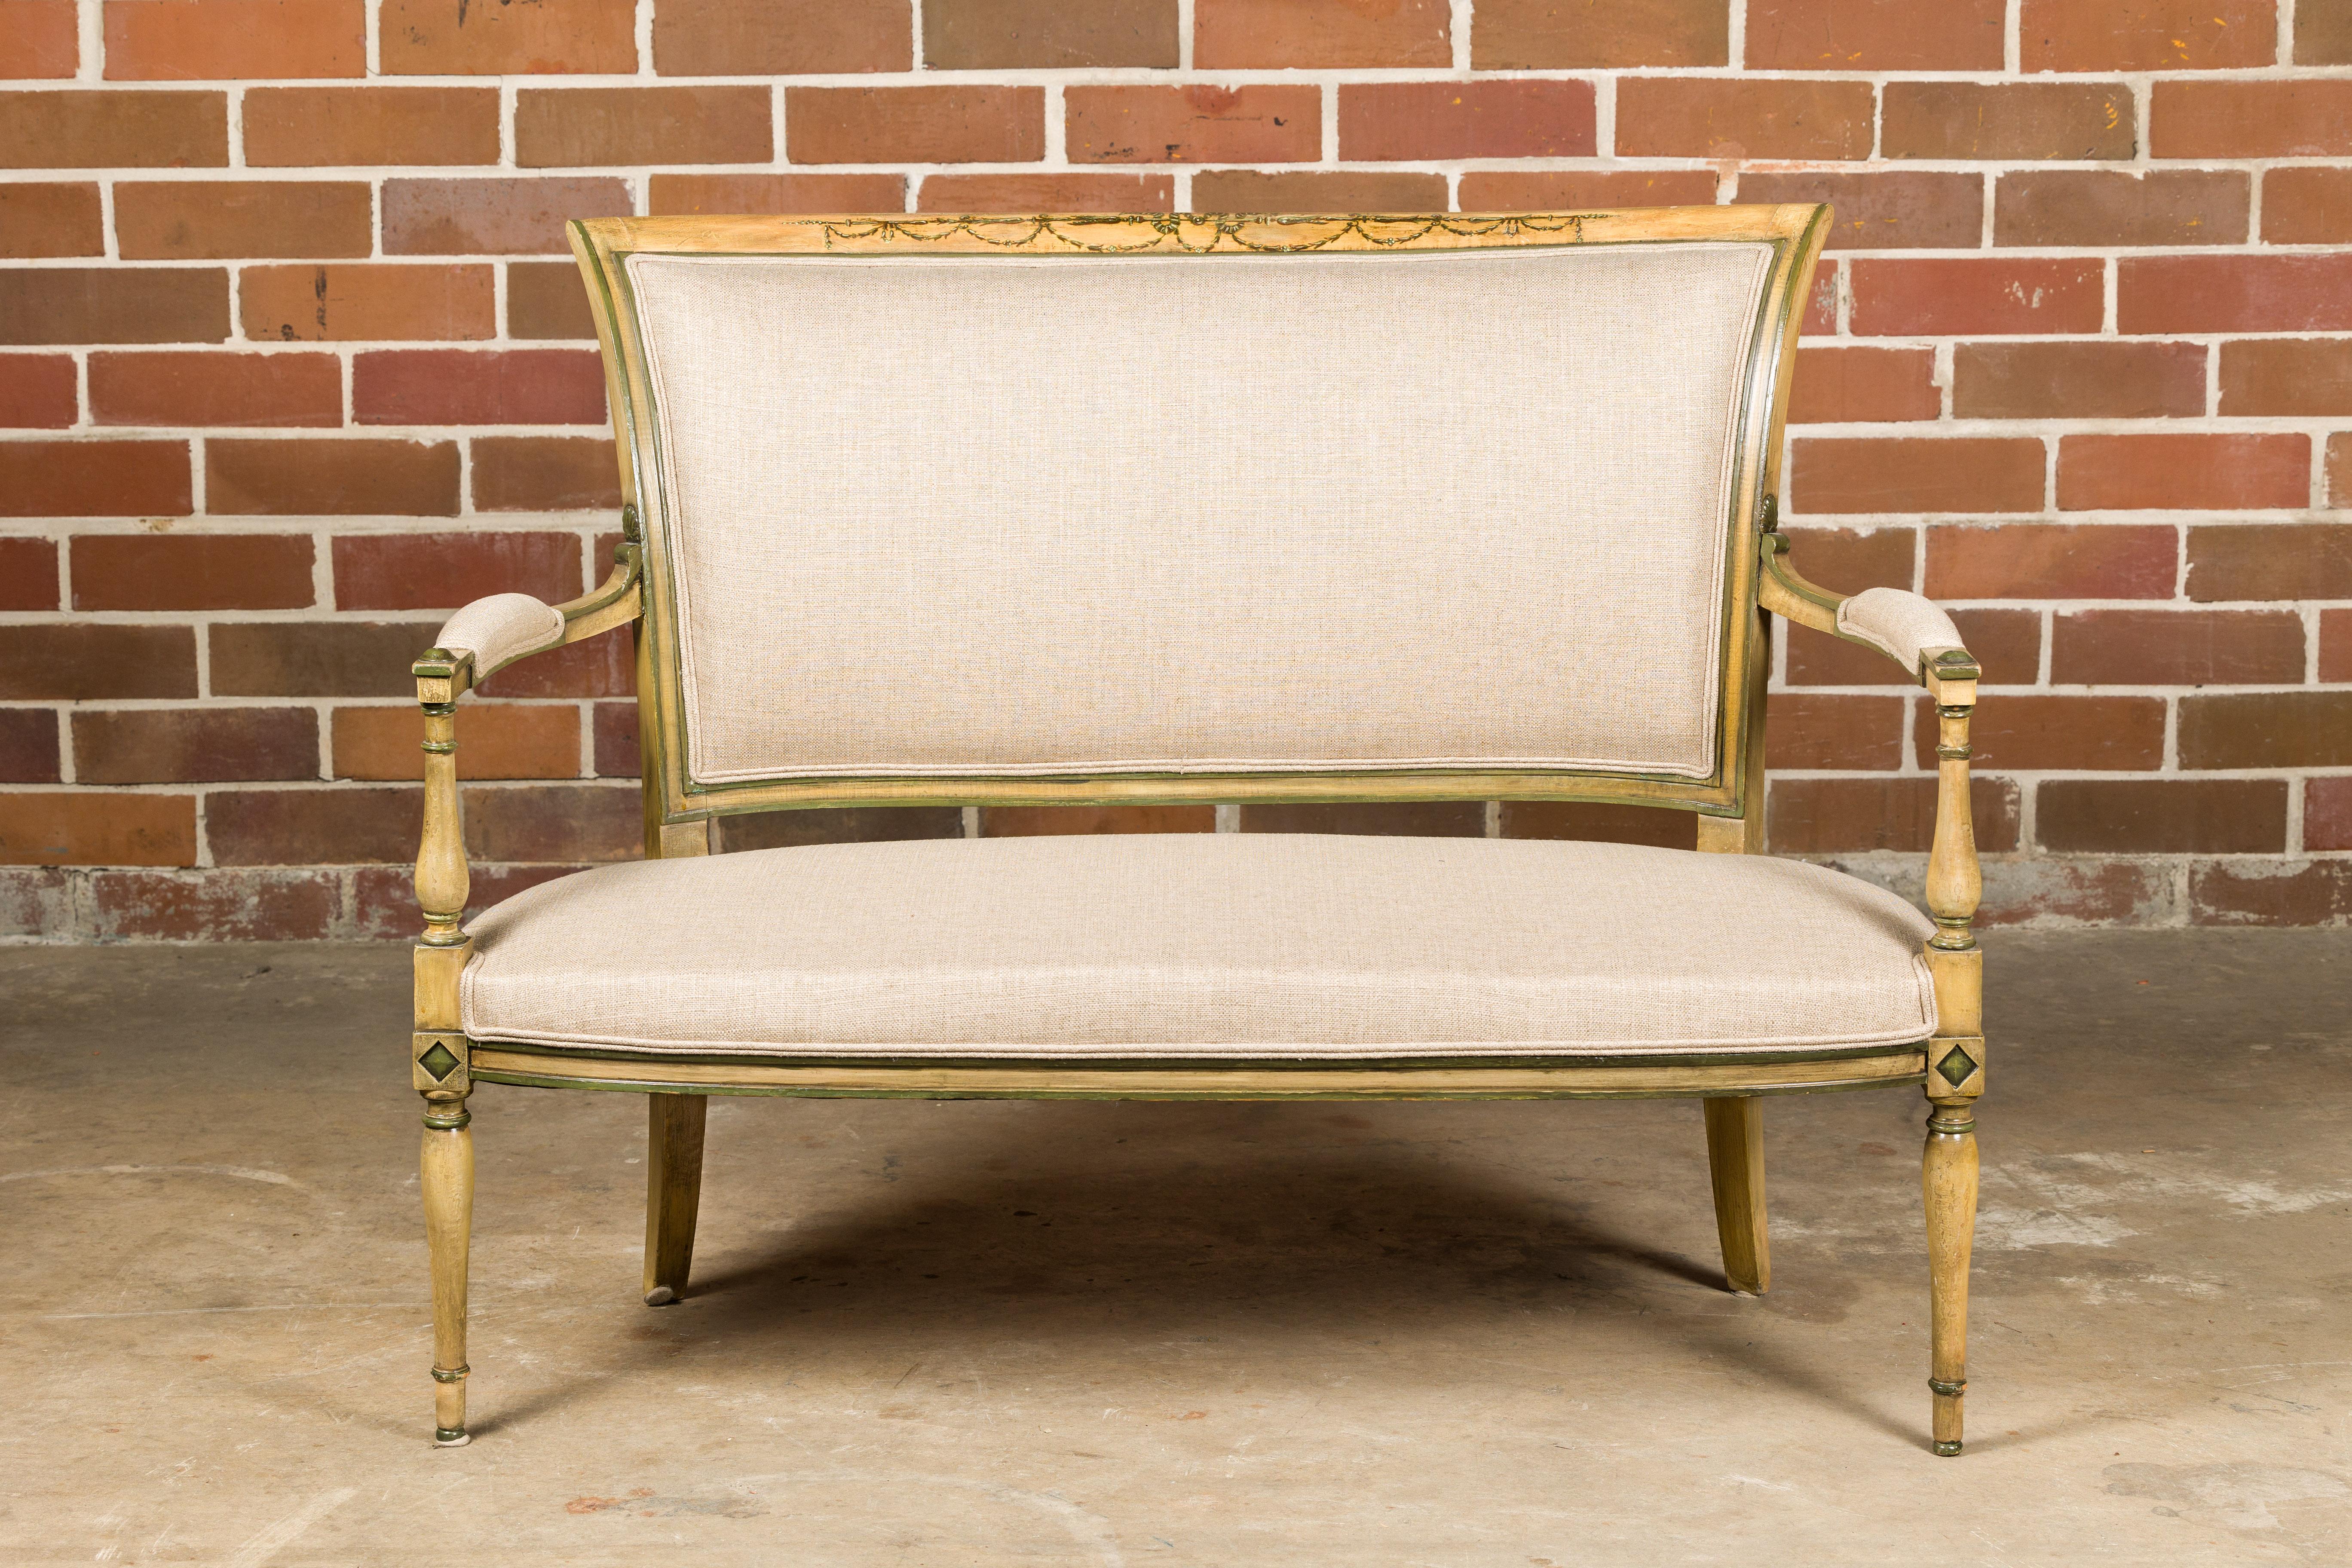 A French Directoire settee from the 19th century with soft creamish yellow painted finish, green accents, painted garlands and linen upholstery. Immerse yourself in the graceful charm of this 19th-century French Directoire settee, a masterpiece that